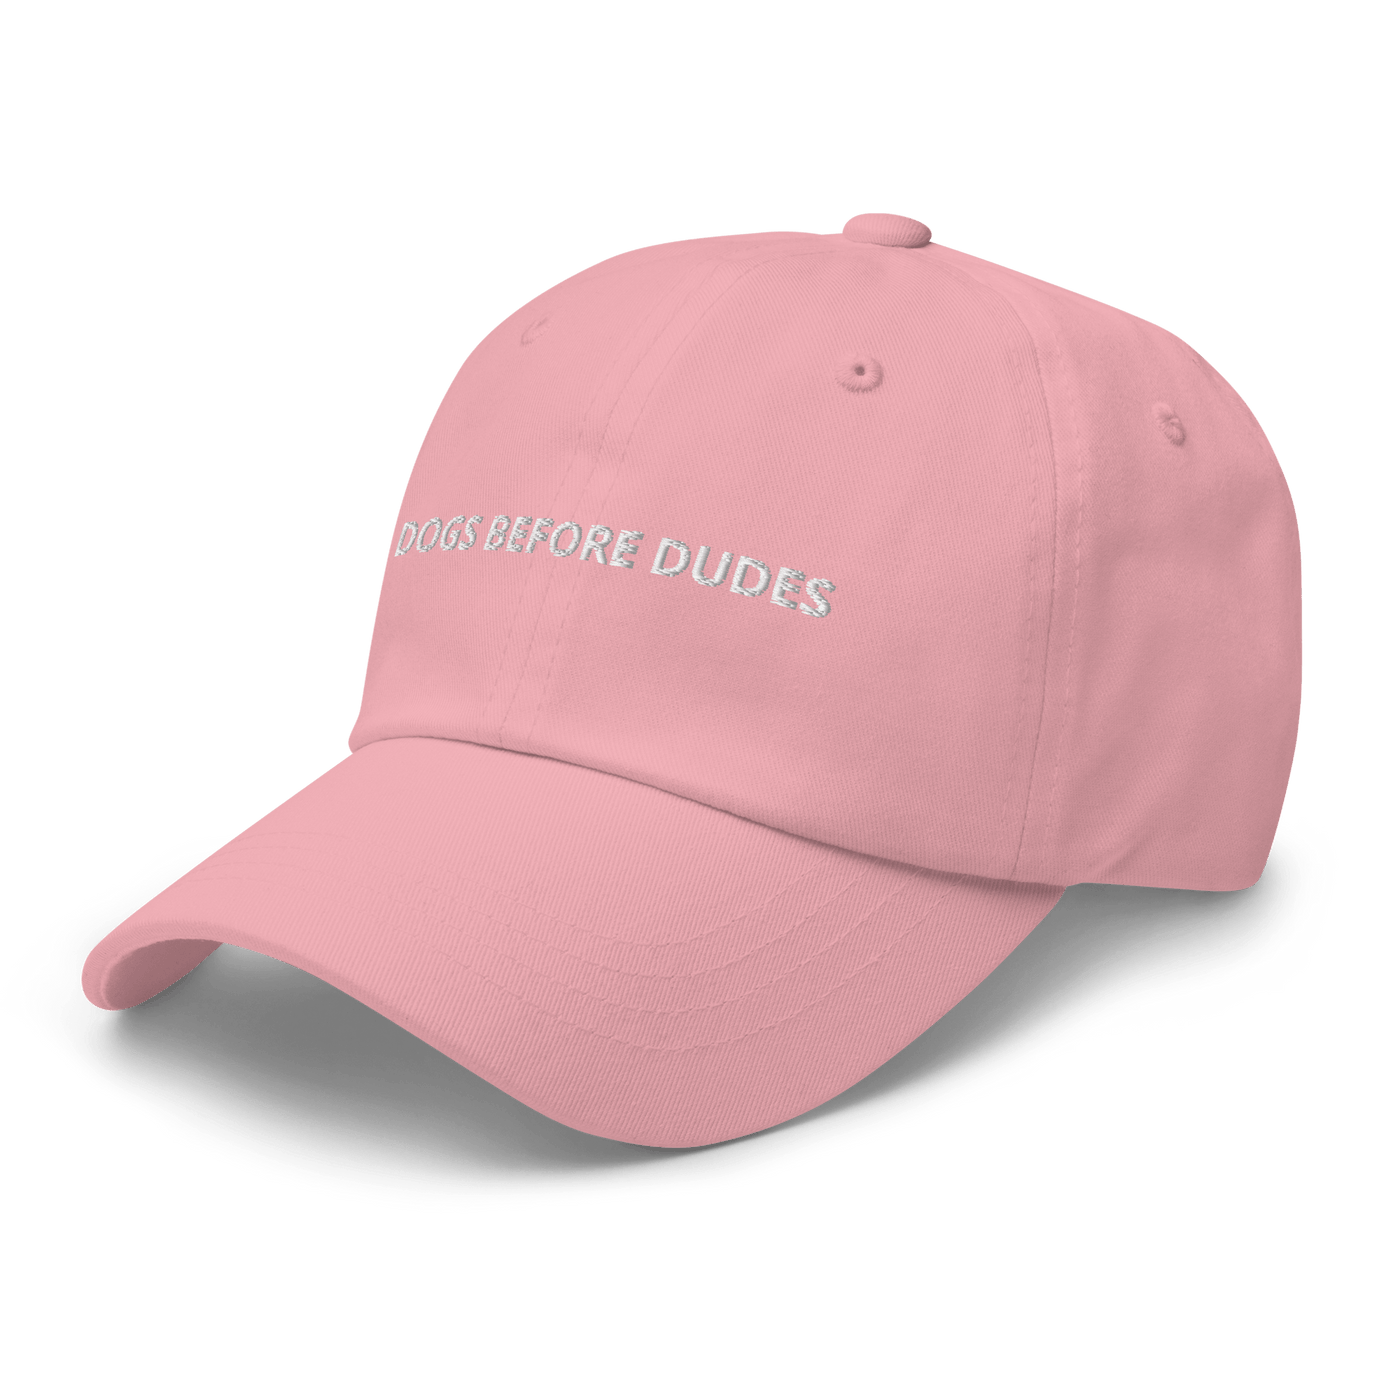 Dogs before Dudes Dad hat - Pink - - Just Another Cap Store